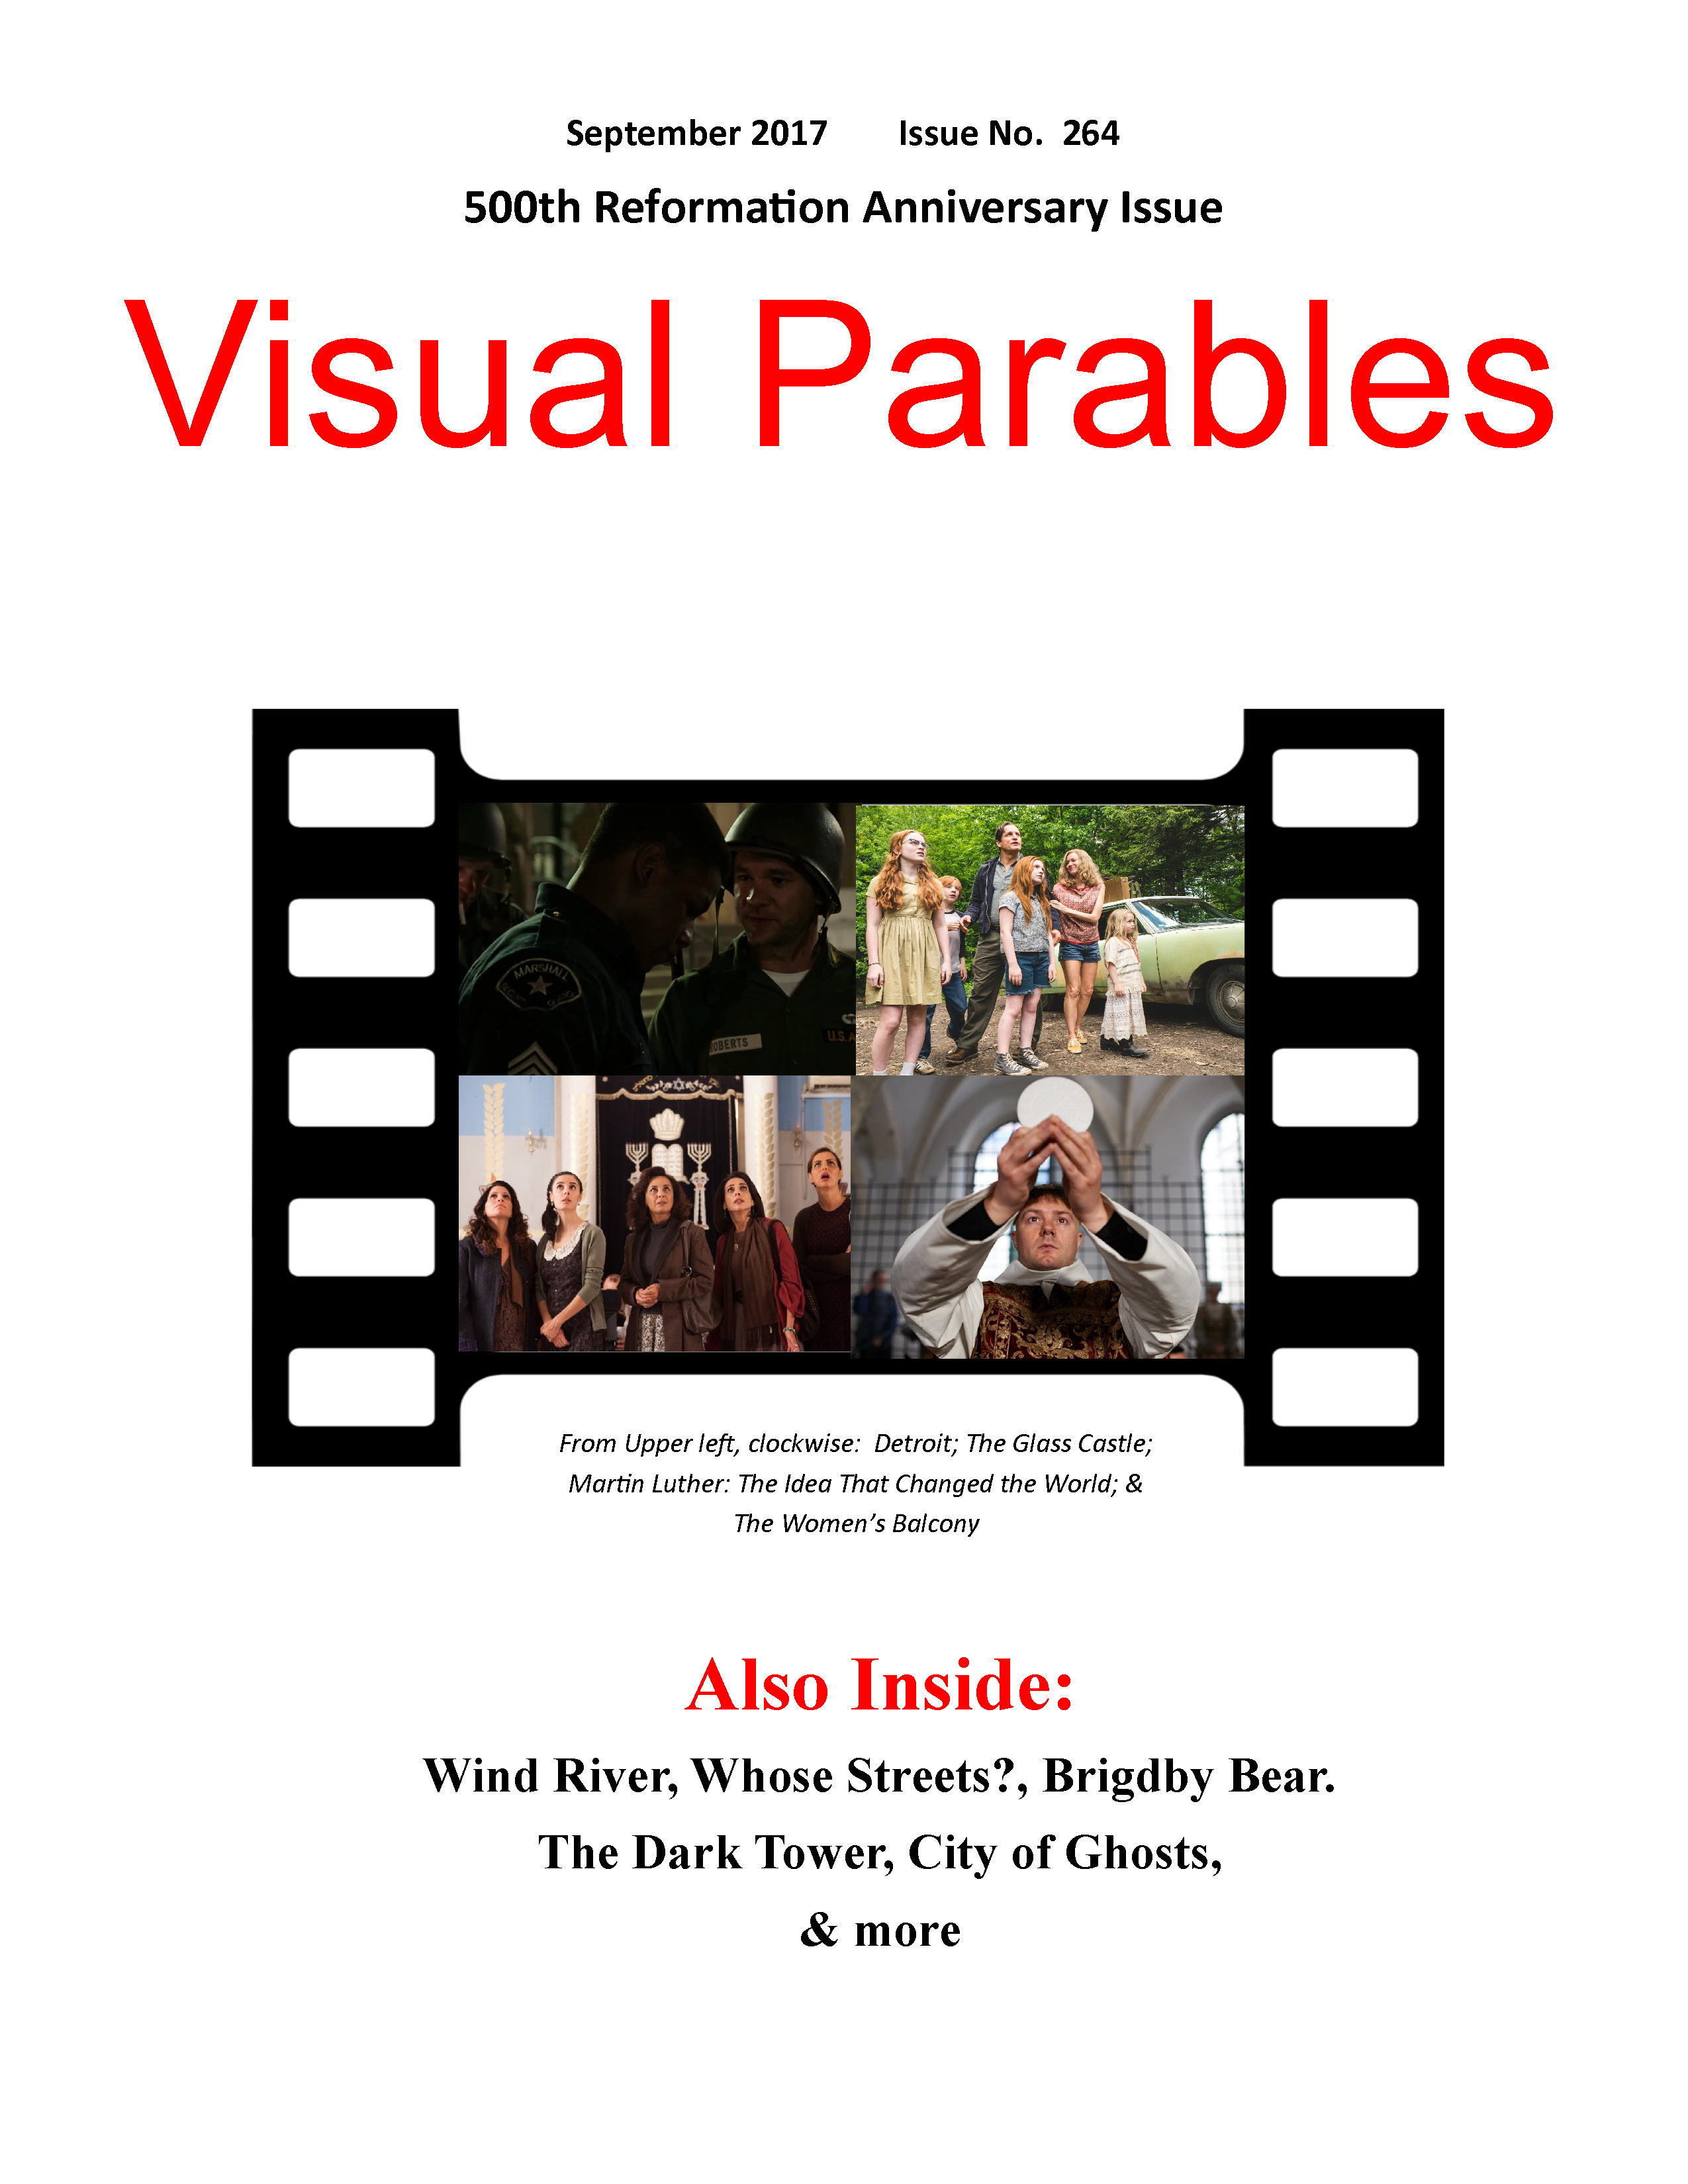 September 2017 issue of Visual Parables